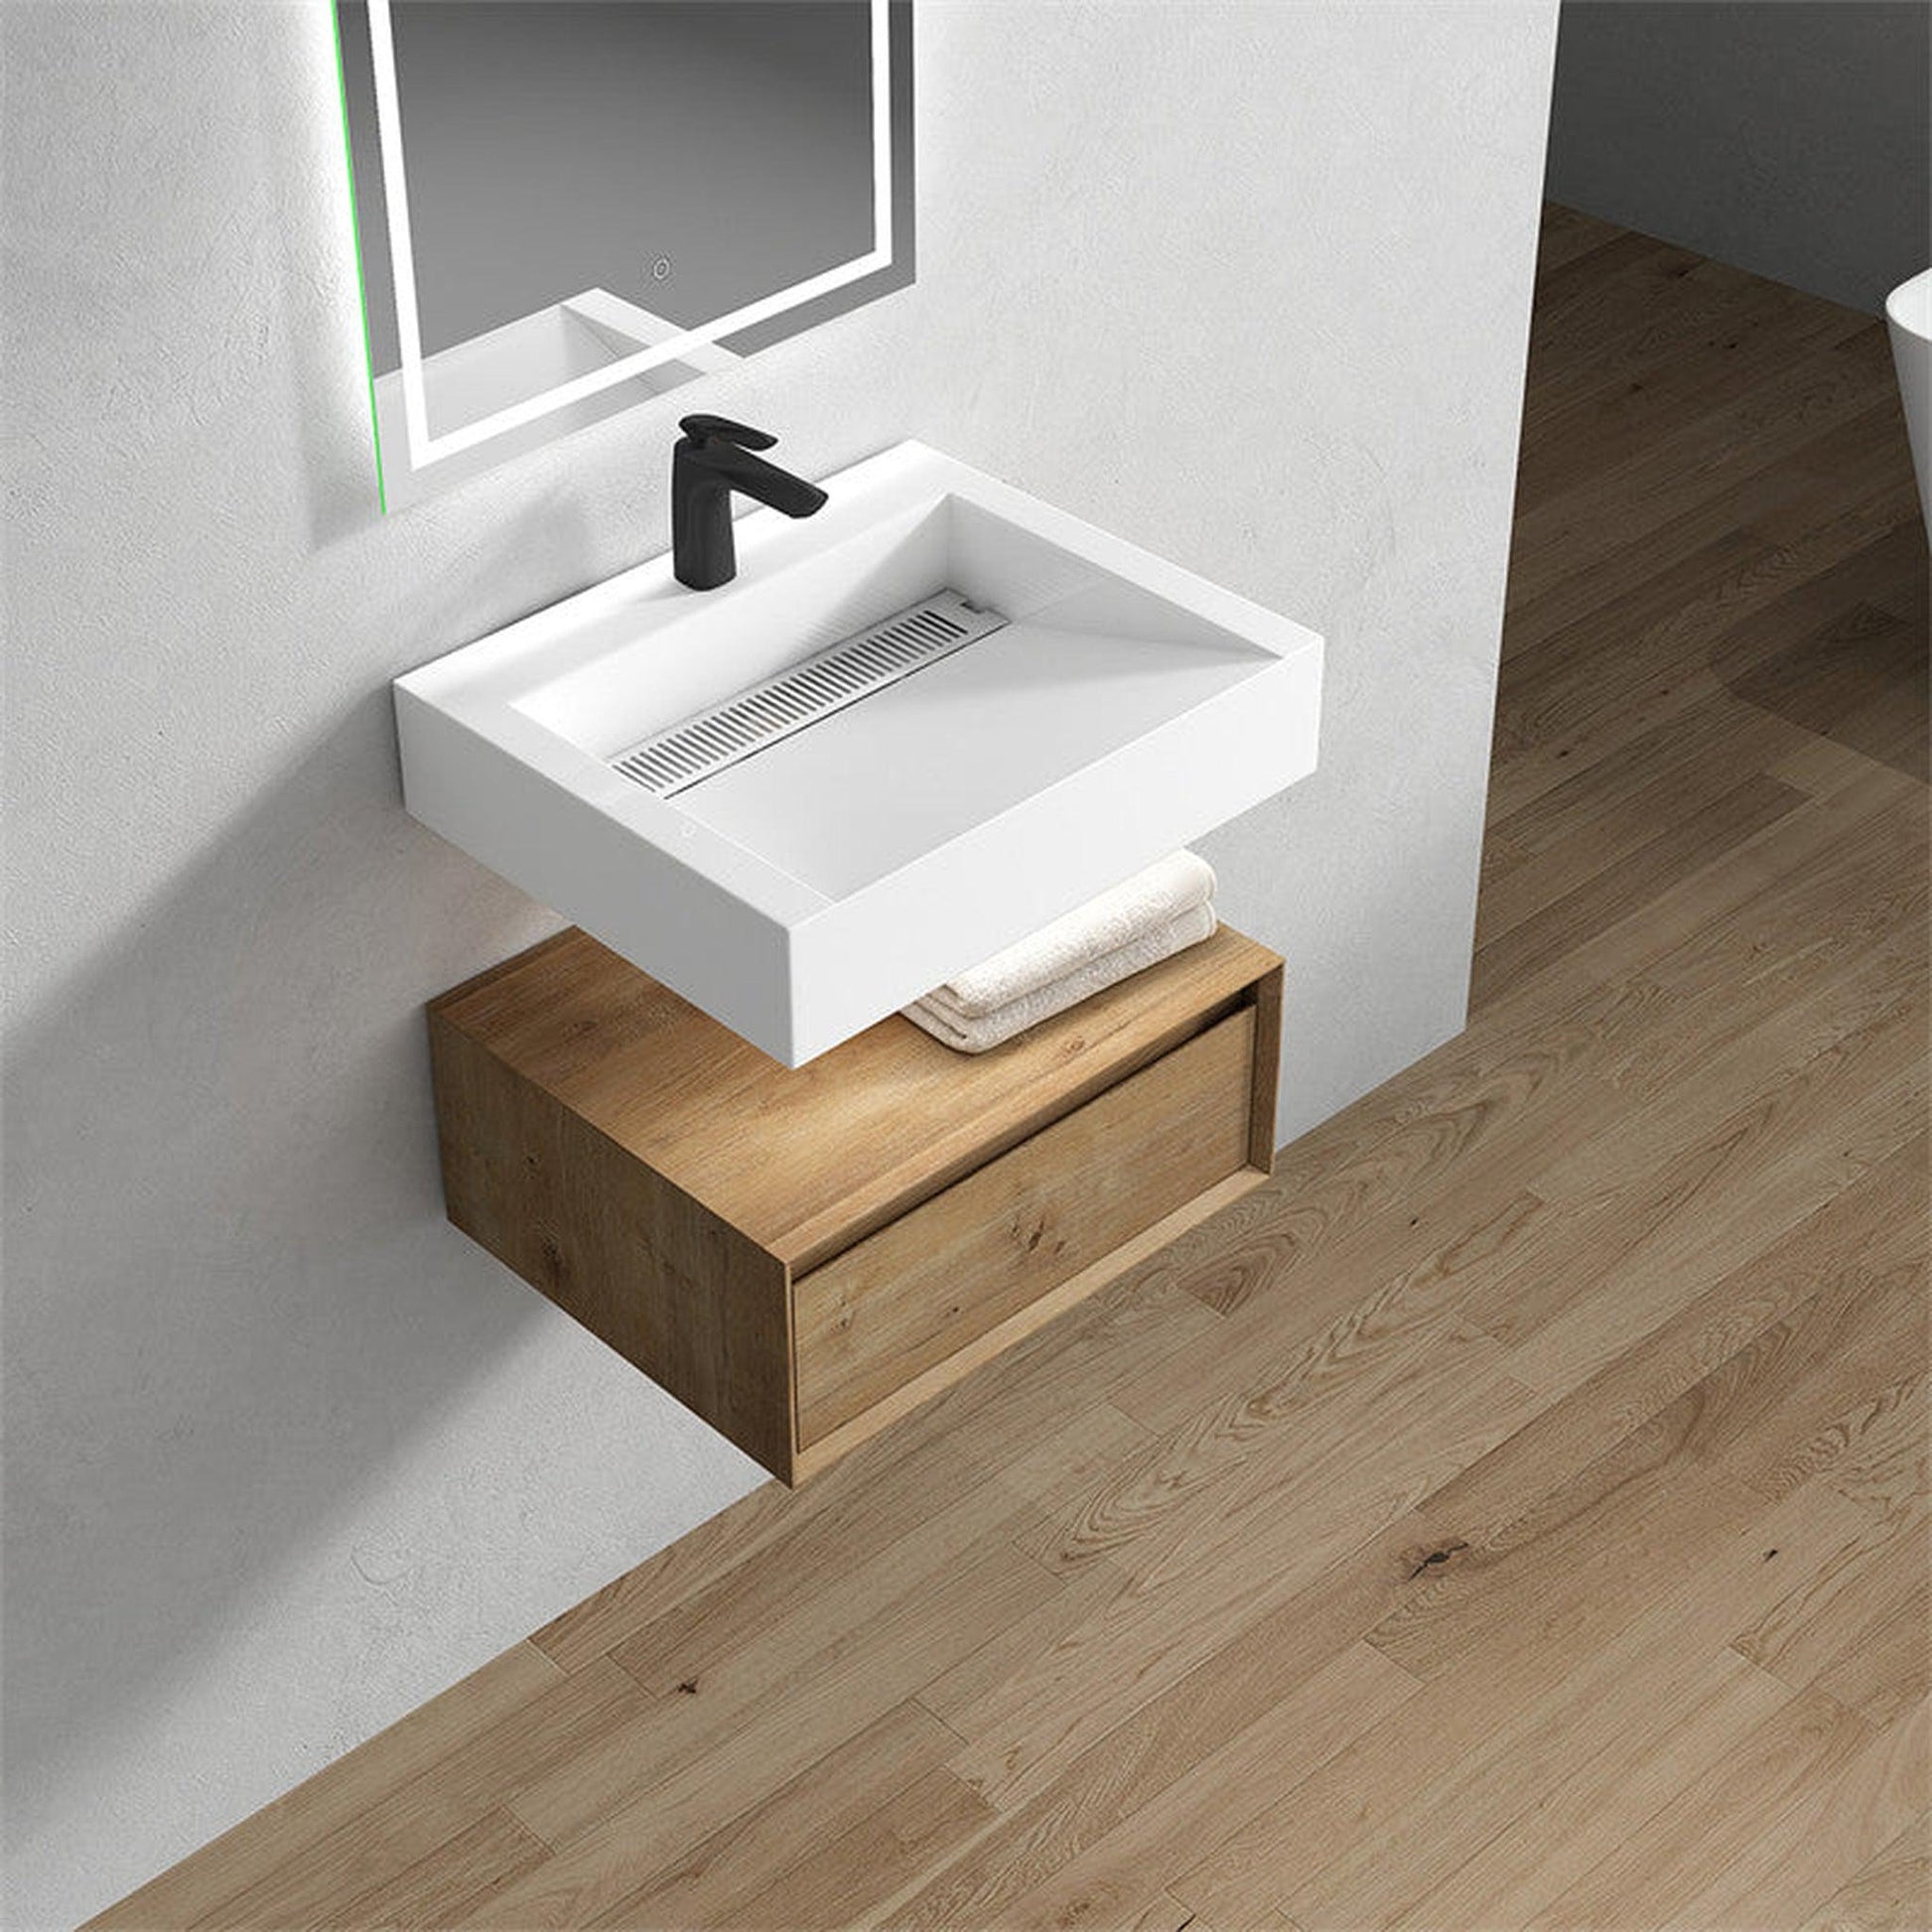 An Affordable Floating Vanity You Can Build in Under an Hour